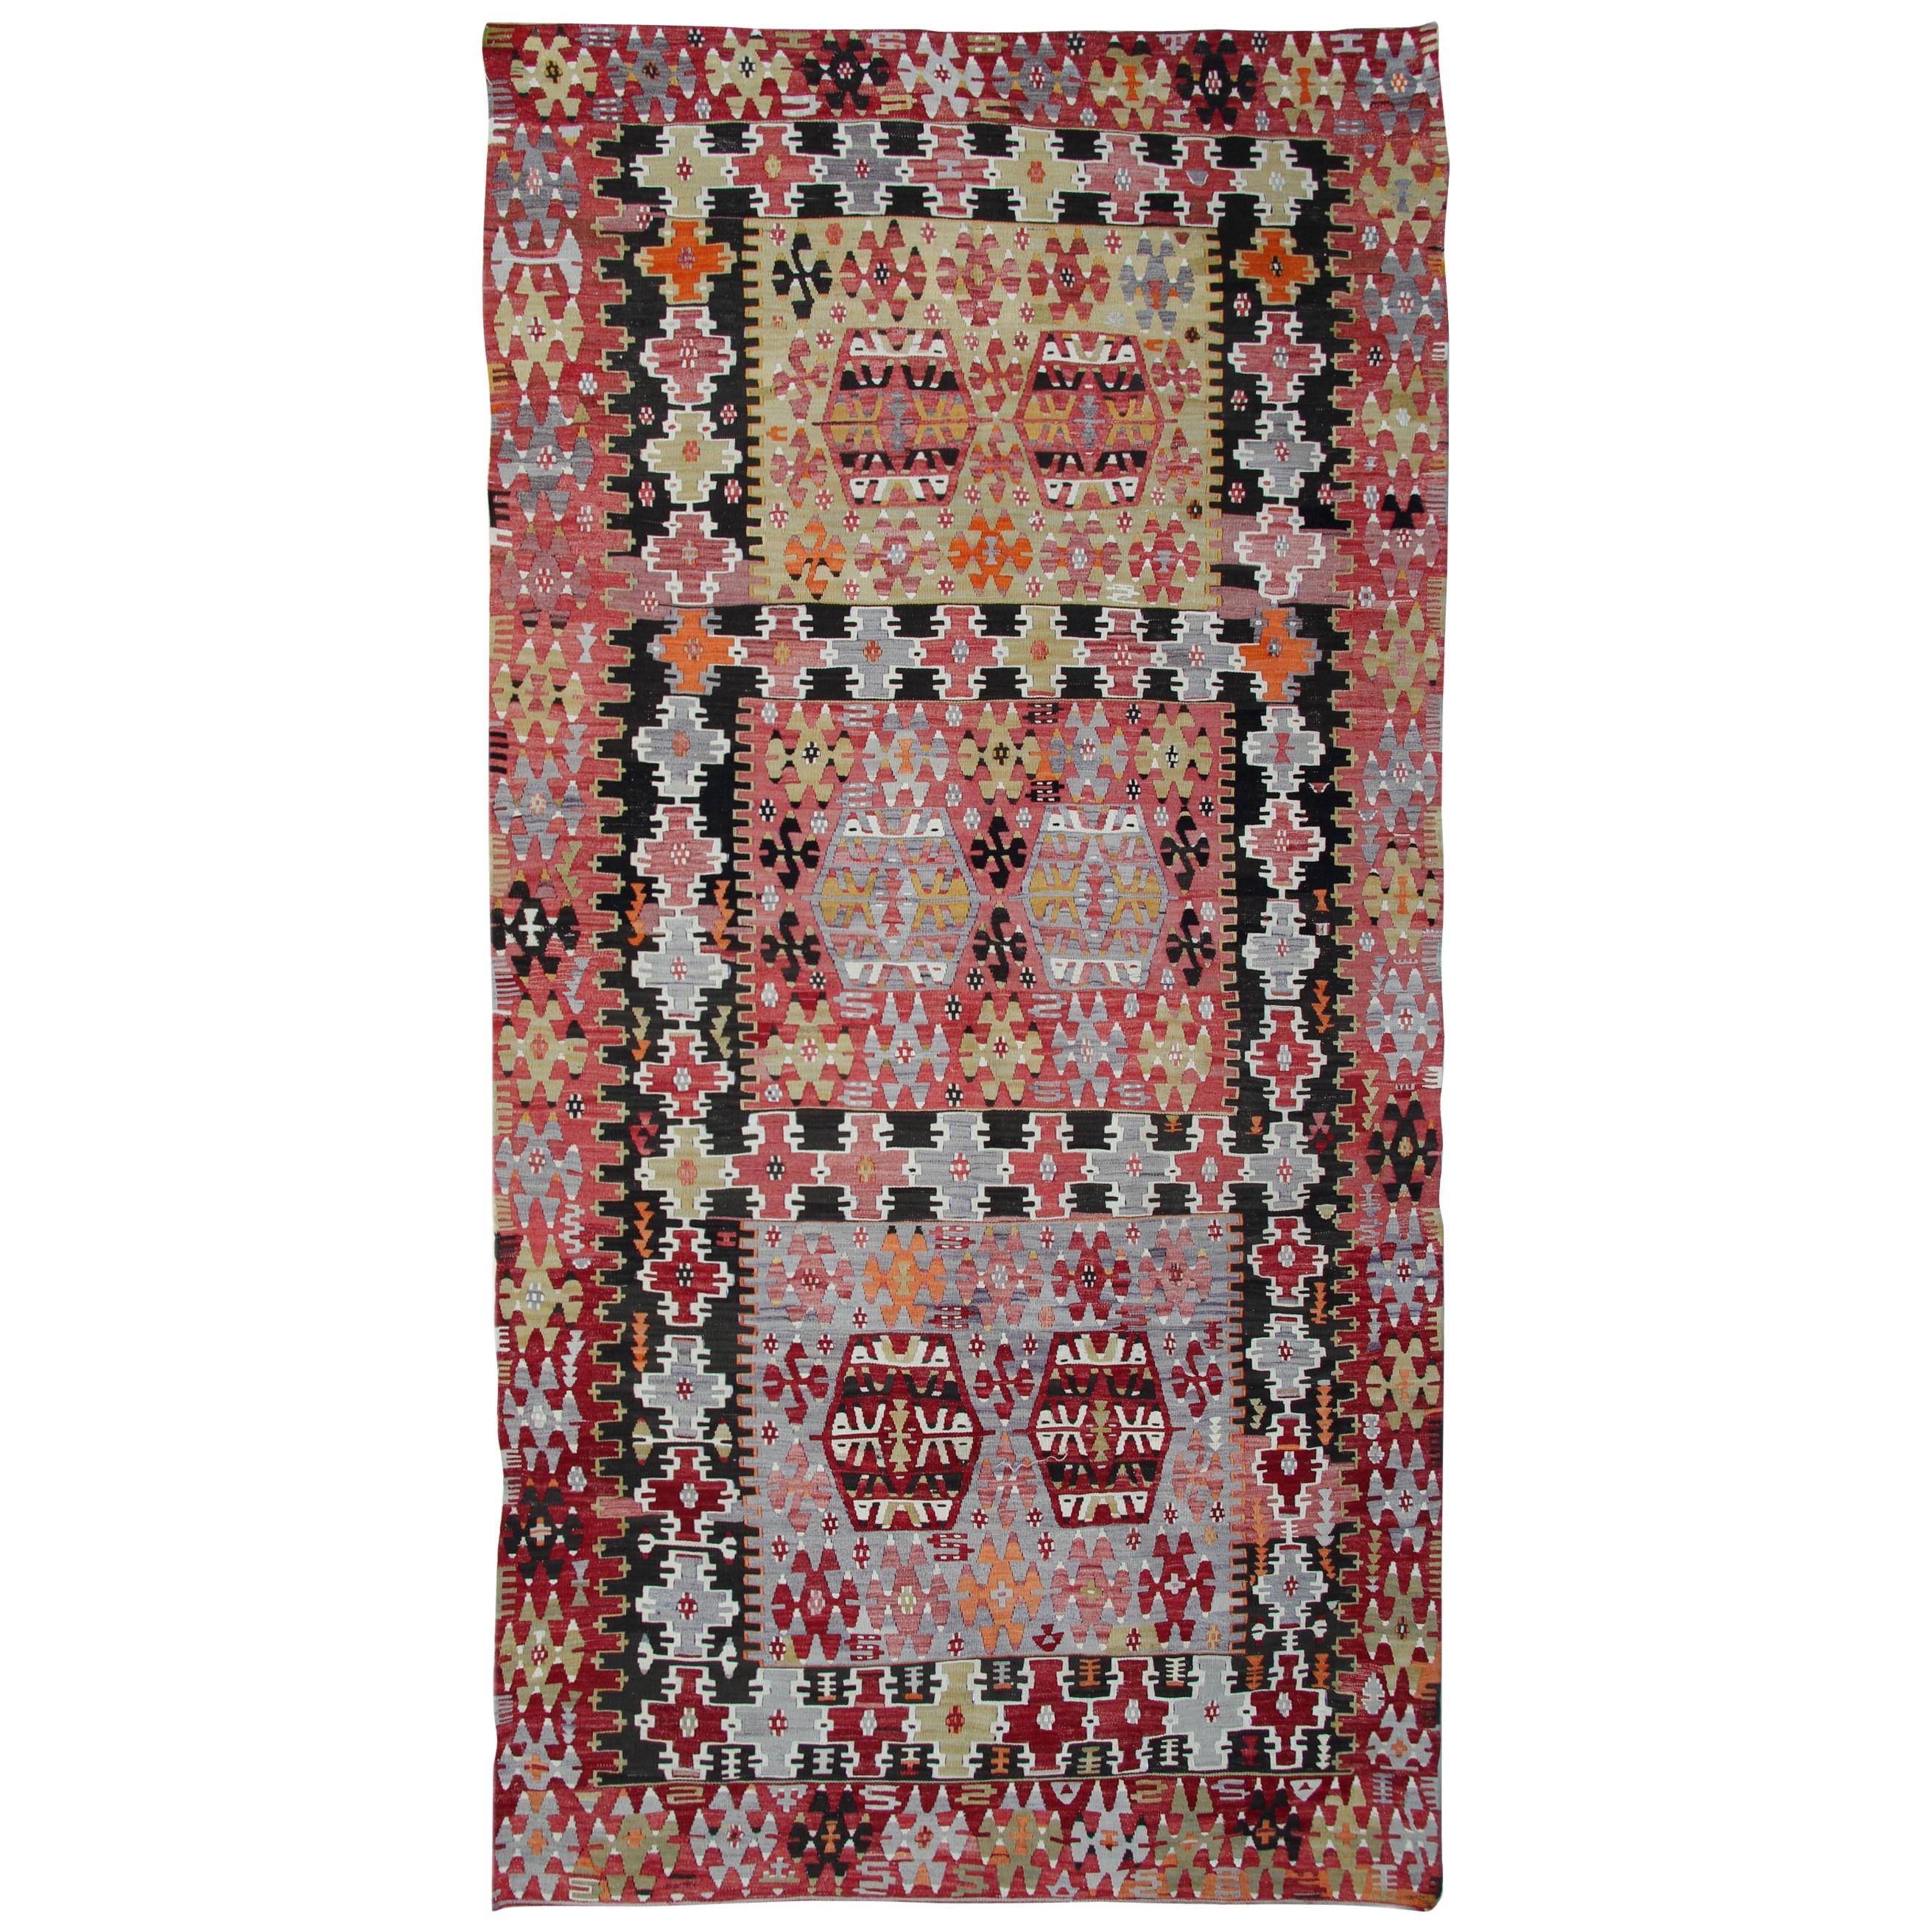 Antique Rugs, Turkish Kilim Rugs, Handmade Carpet, Oriental Rugs for Sale For Sale